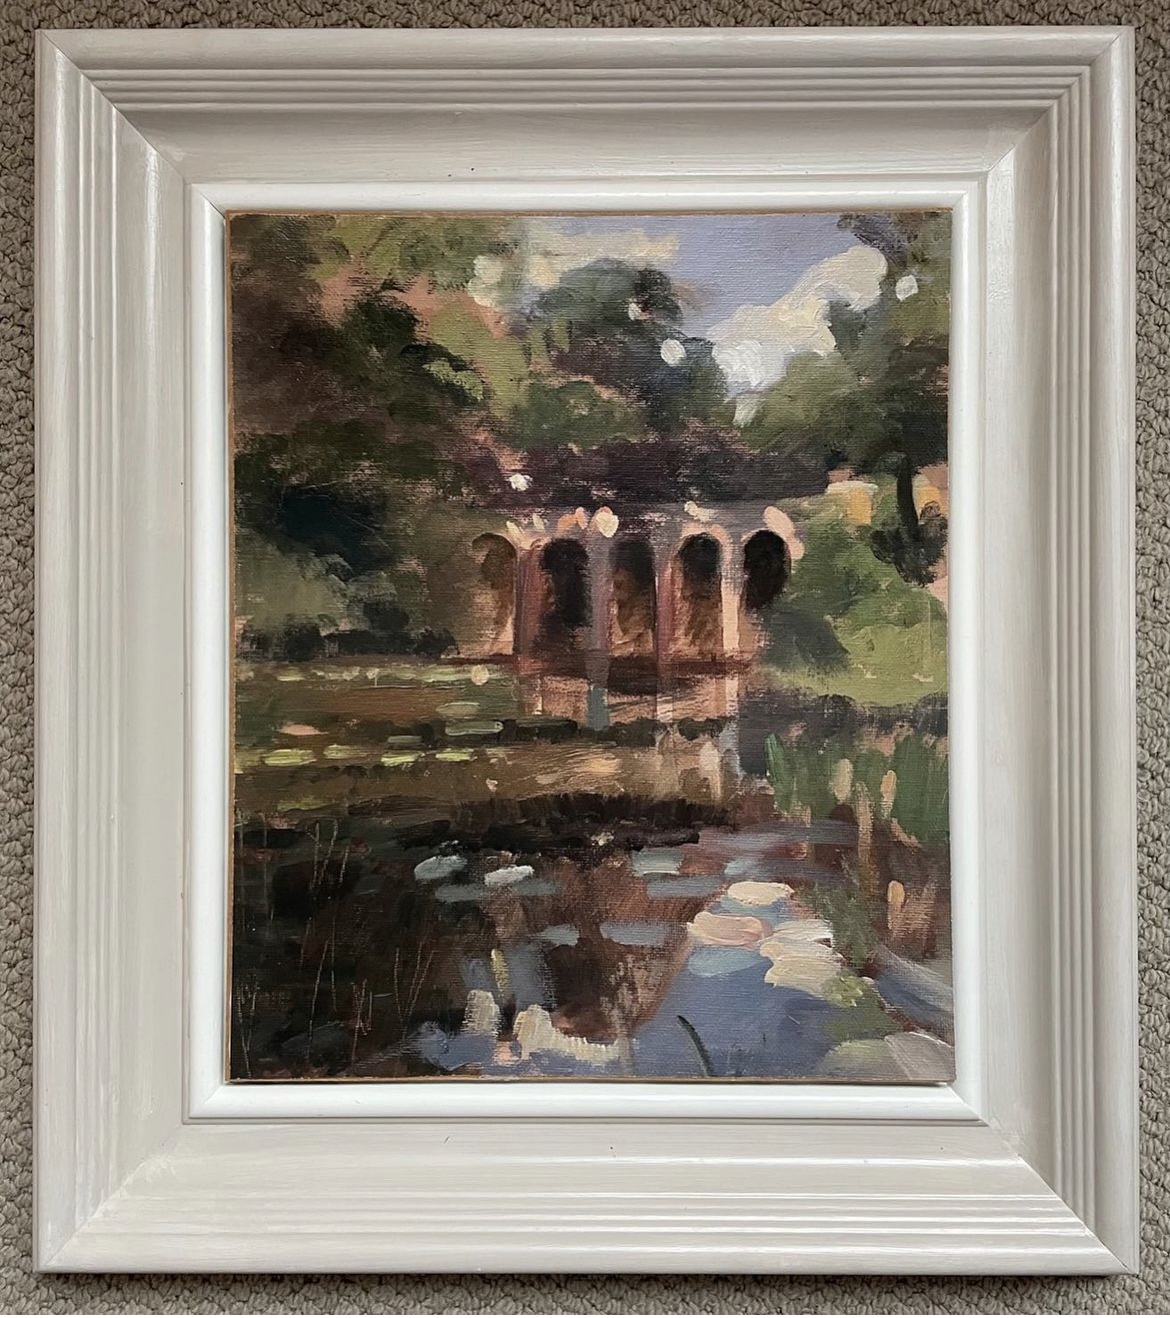 Best selling framed print of Hampstead Viaduct. Printed on canvas, it looks like a real painting 10" x 12" plus frame size £220 (Sale price £195)